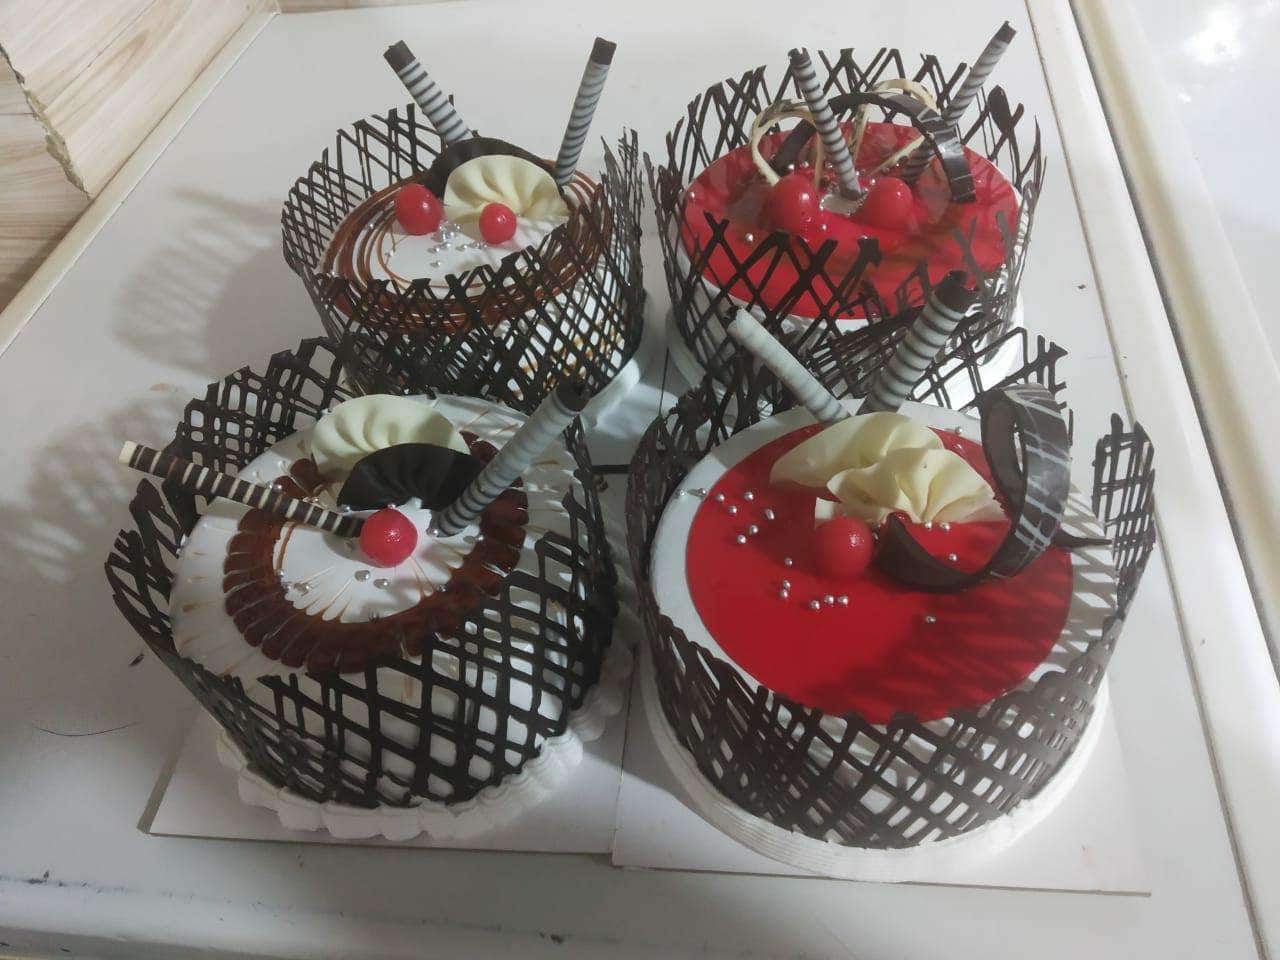 Online Cake Delivery in Chennai | Order Cake Online Chennai, Cake Shop in  Chennai, Cake World Chennai, Online Shopping … | Online cake delivery, Cake,  Cake delivery